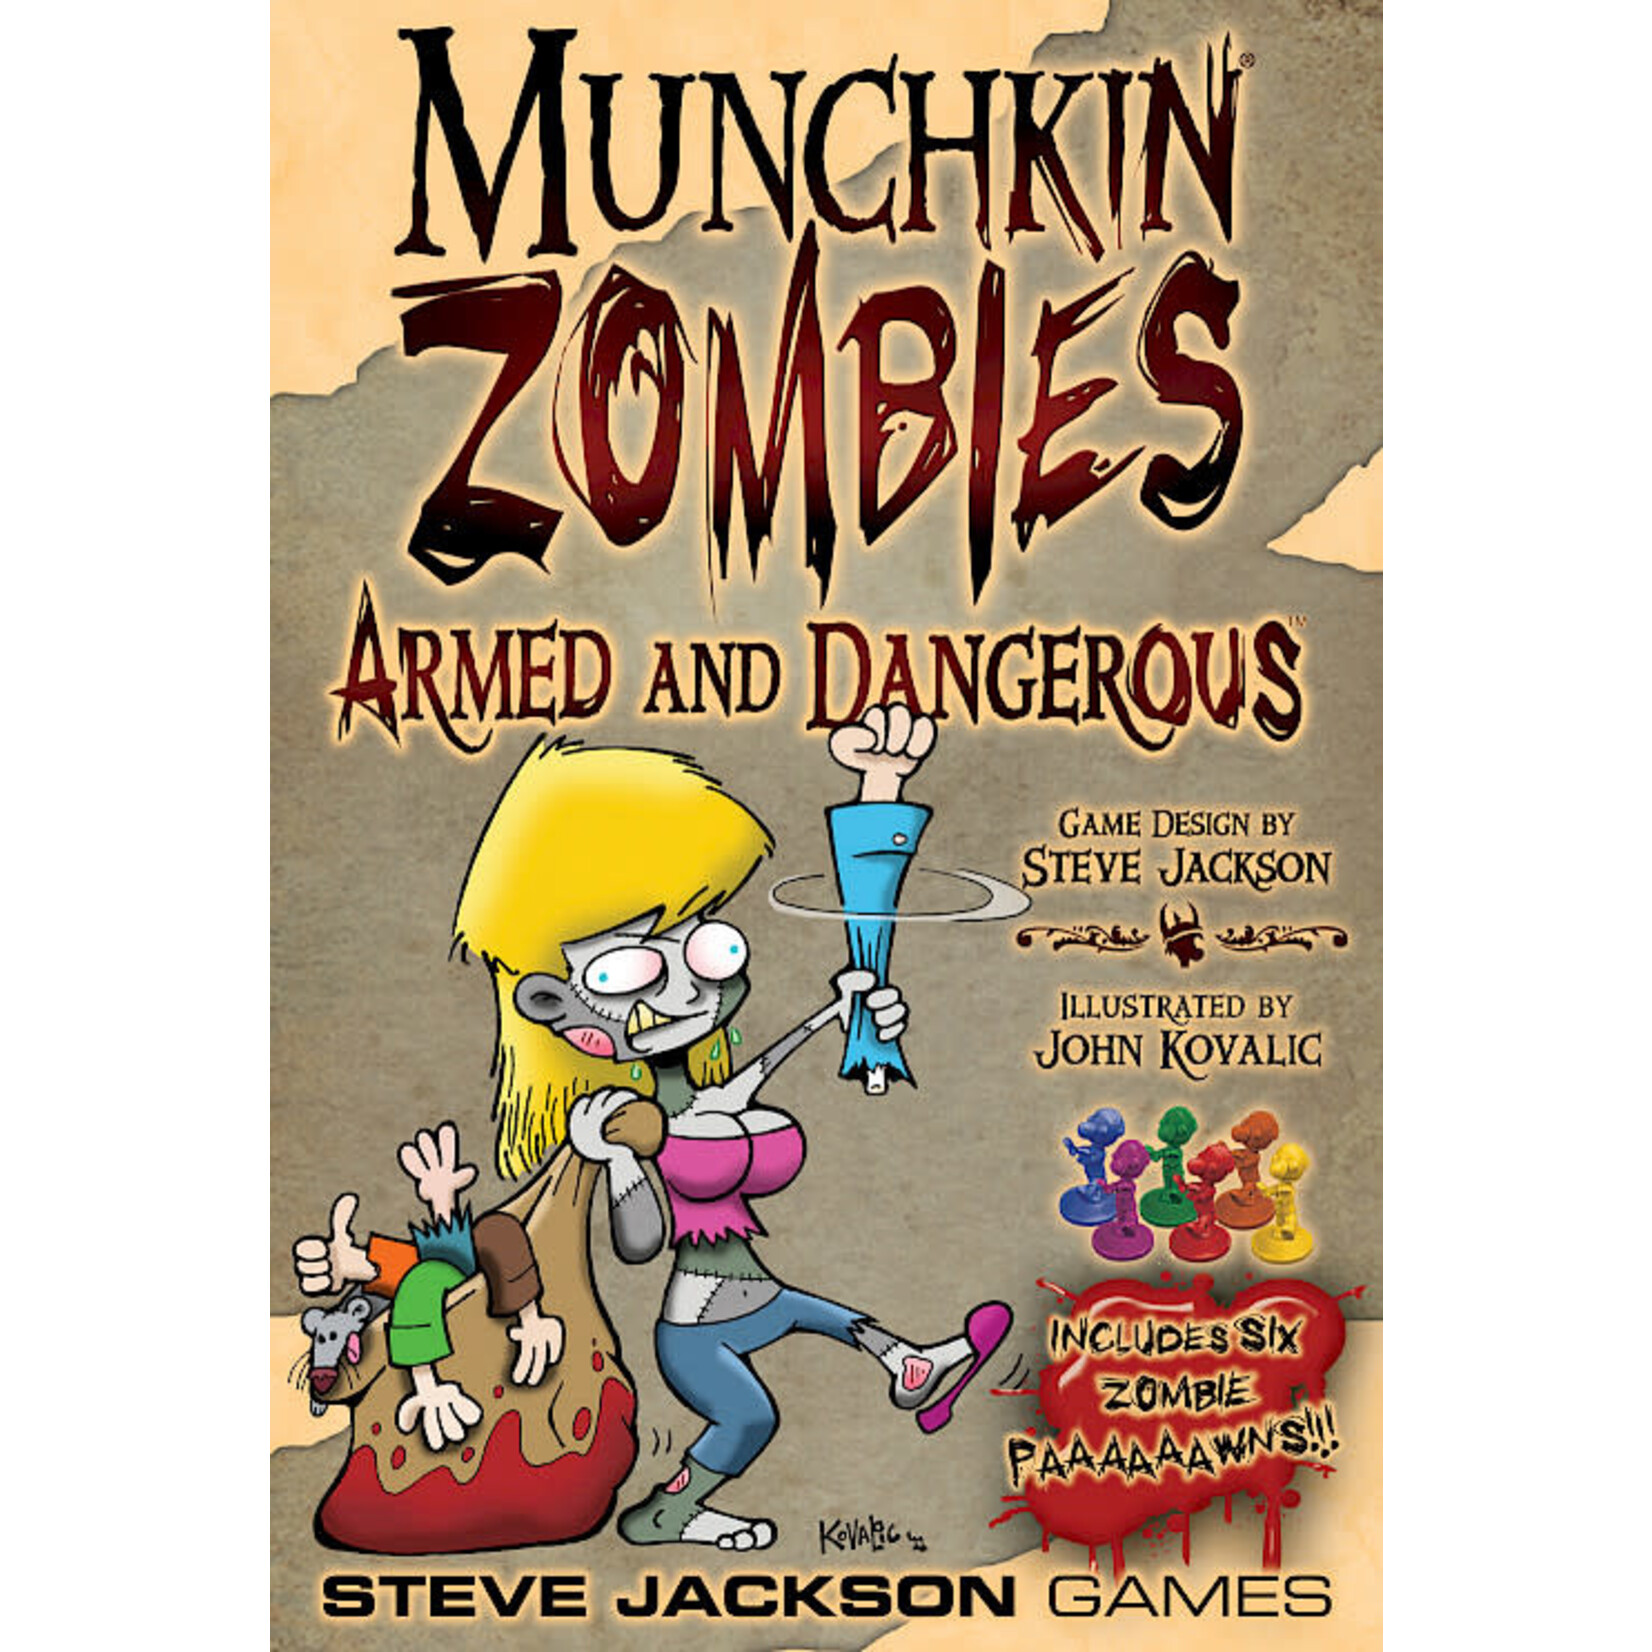 Steve Jackson Games Munchkin Zombies 2 - Armed and Dangerous